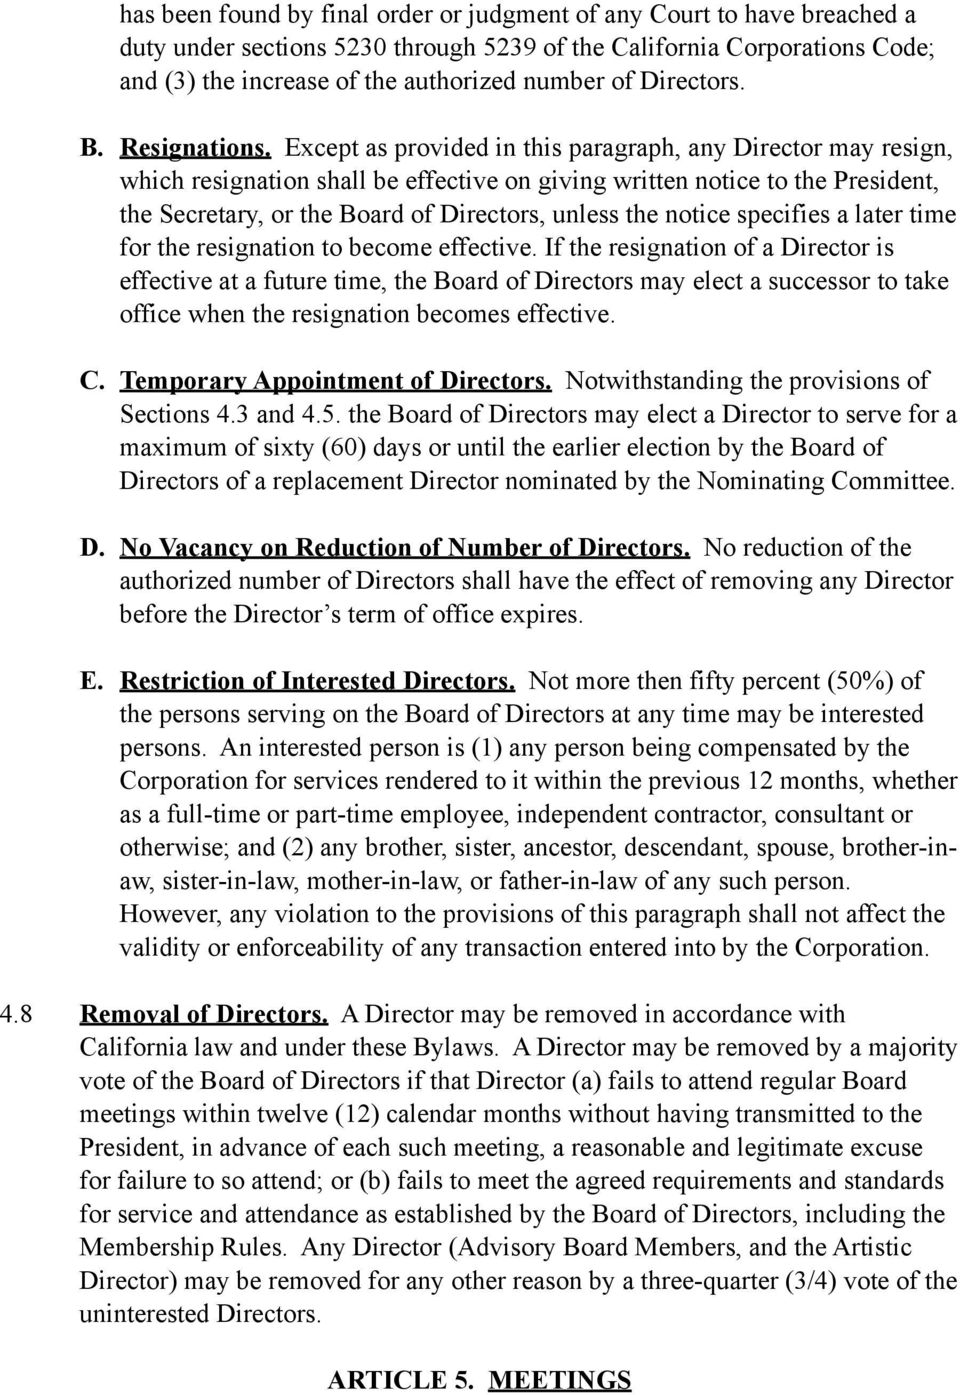 Except as provided in this paragraph, any Director may resign, which resignation shall be effective on giving written notice to the President, the Secretary, or the Board of Directors, unless the